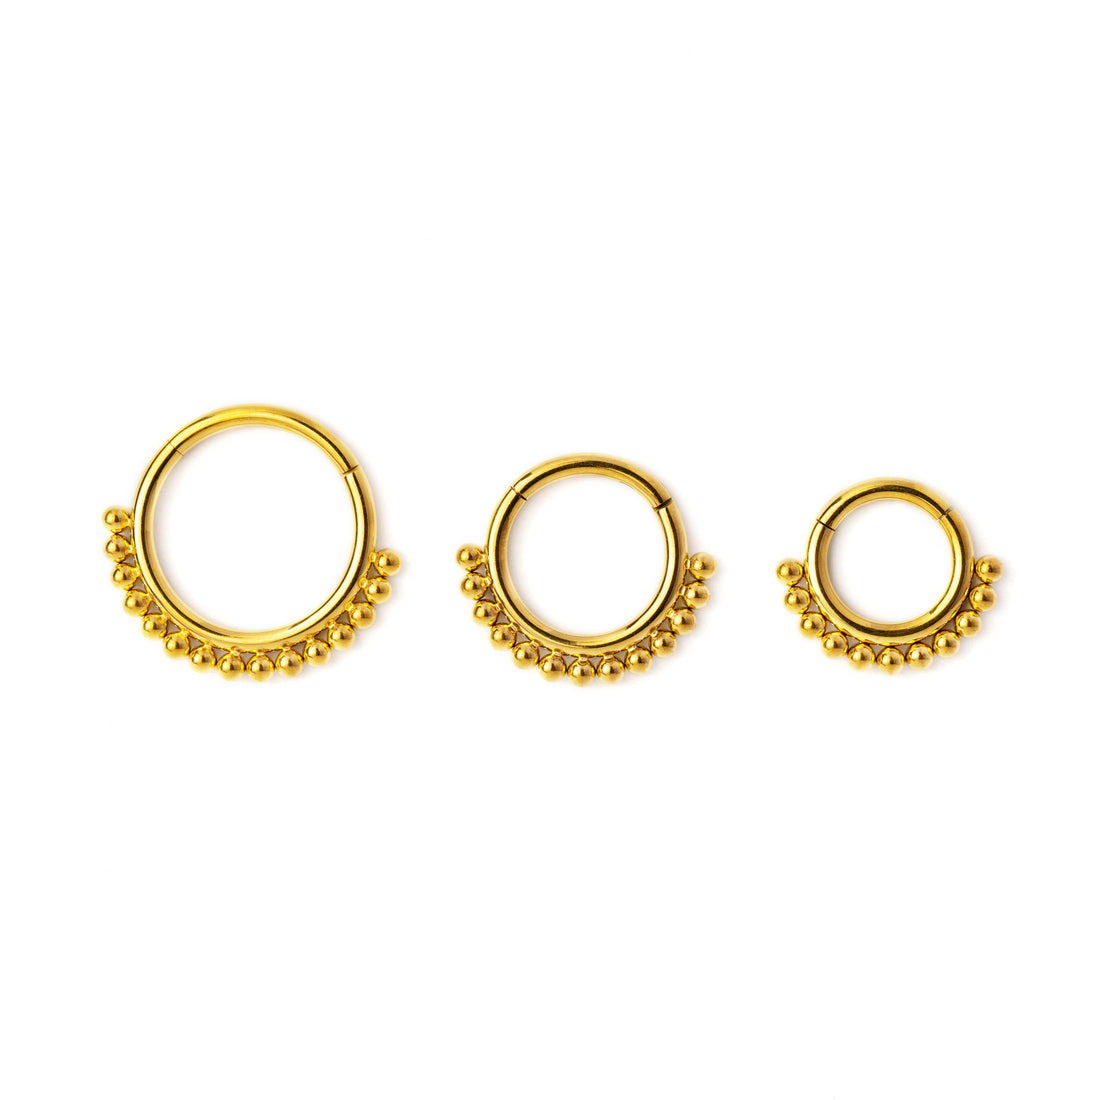 6mm, 8mm, 10mm Liya Gold surgical steel septum clicker rings frontal view